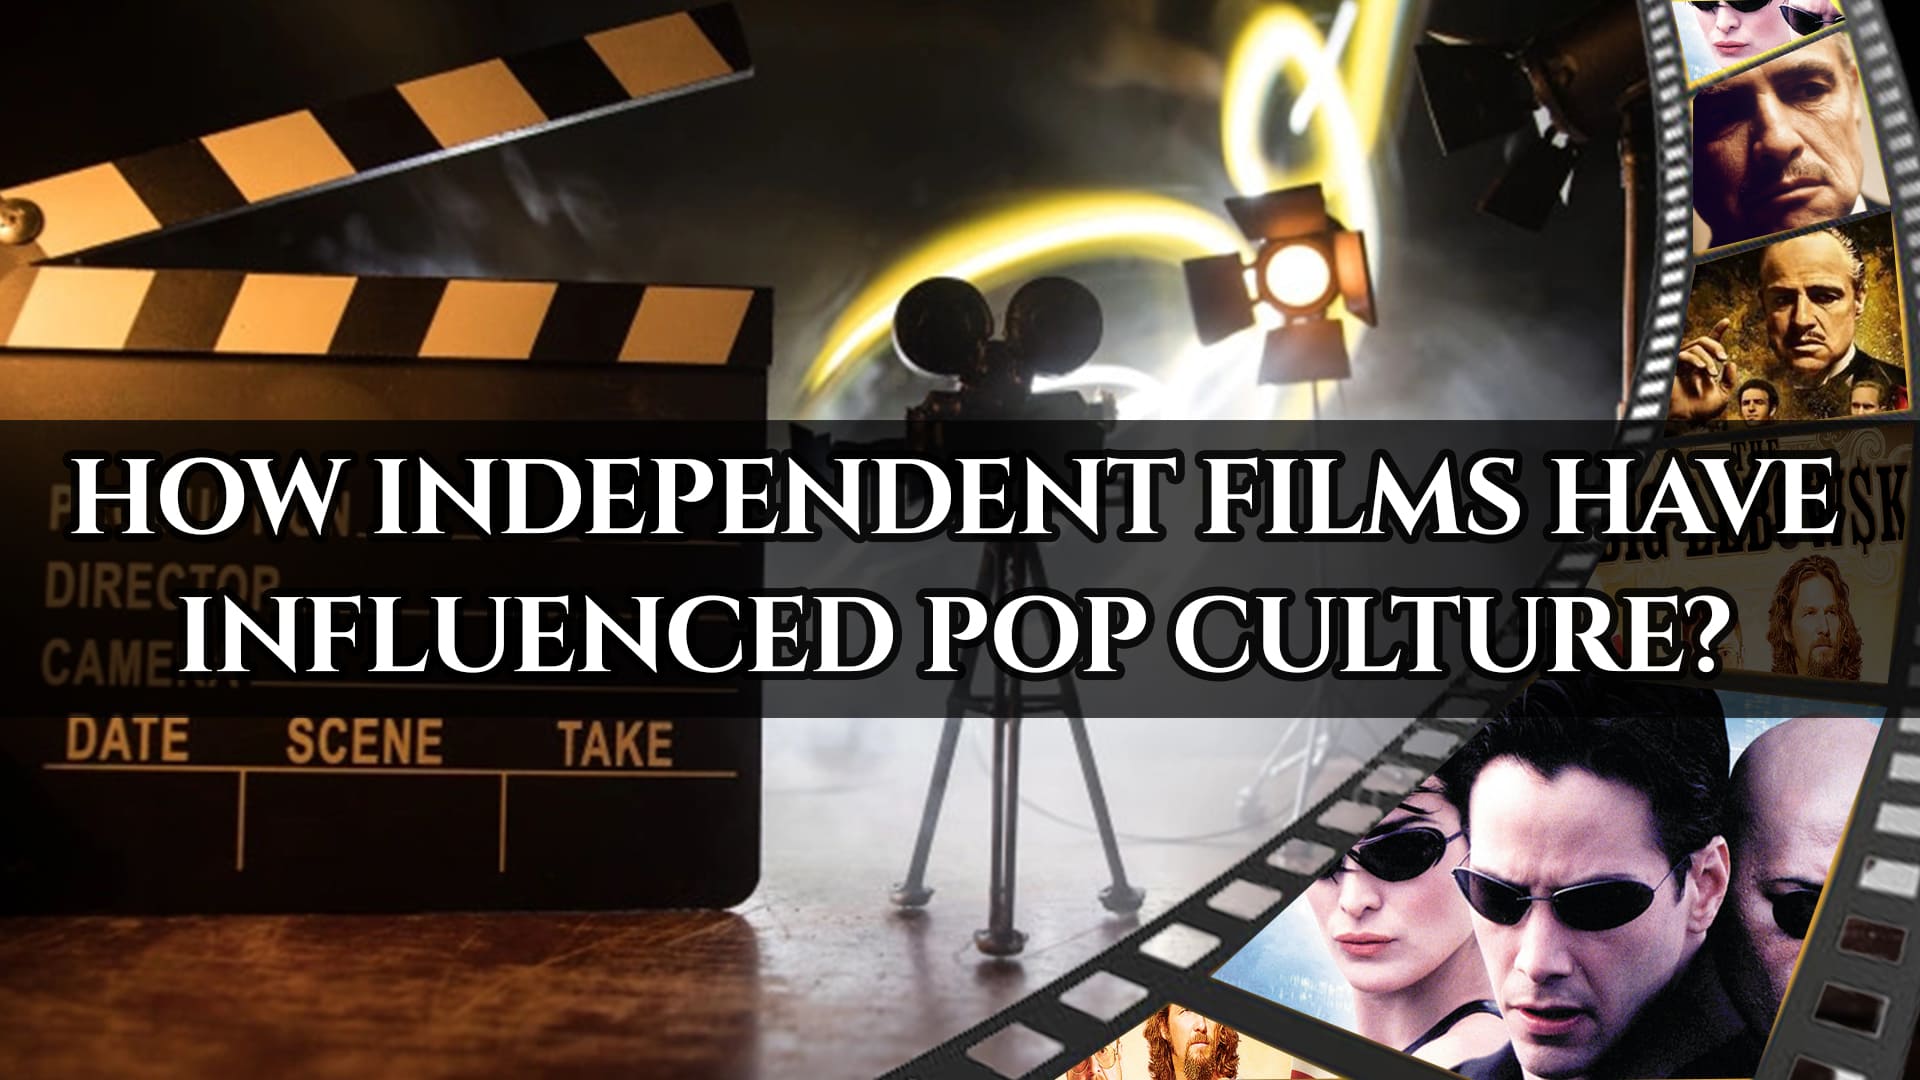 HOW INDEPENDENT FILMS HAVE INFLUENCED POP CULTURE?